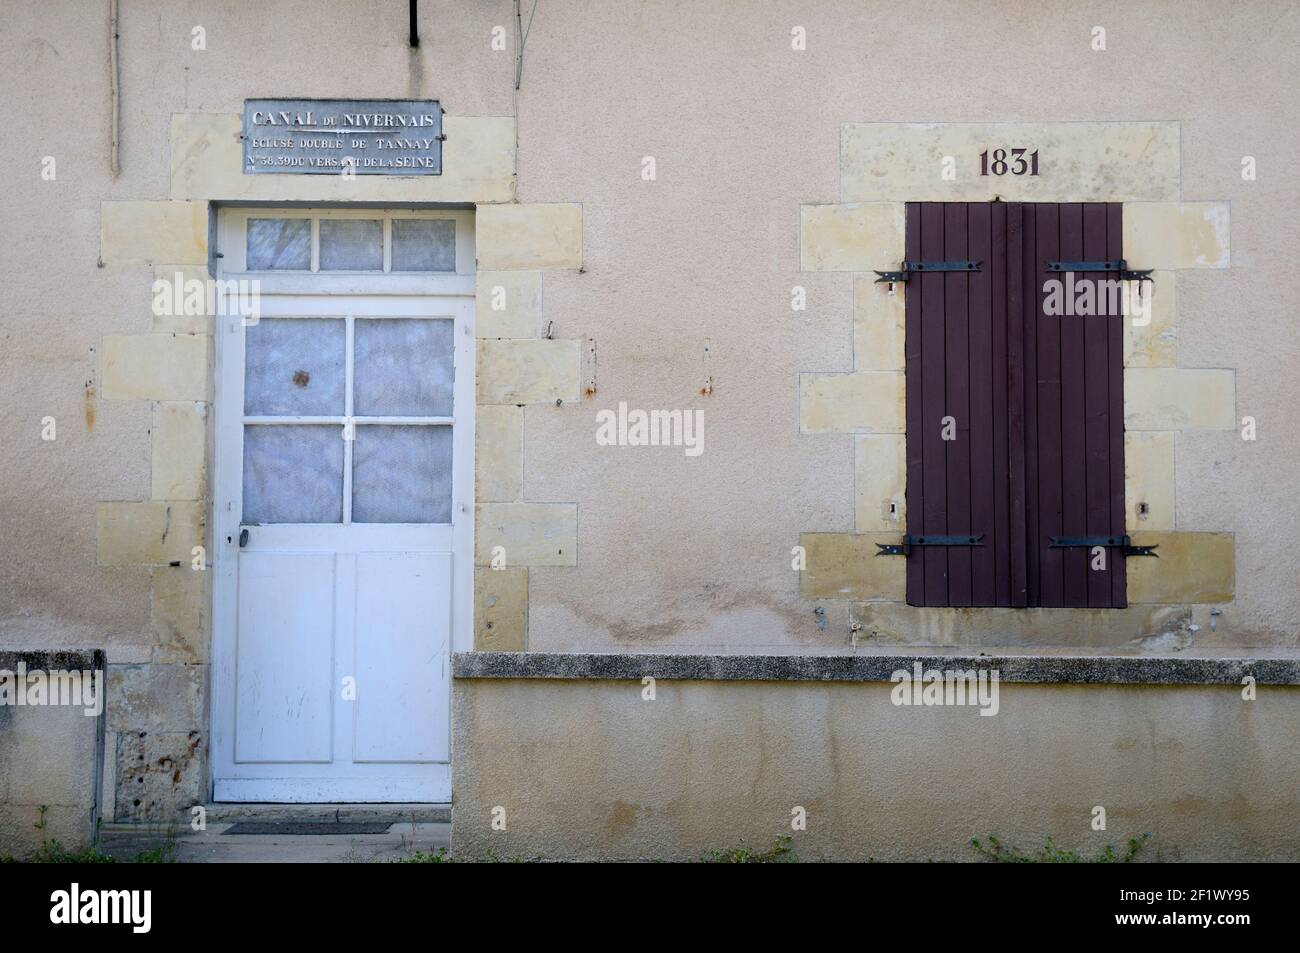 Lock keepers house, Ecluses 38-39 Tannay, D165, Tannay, Nievre, Burgundy. France Stock Photo